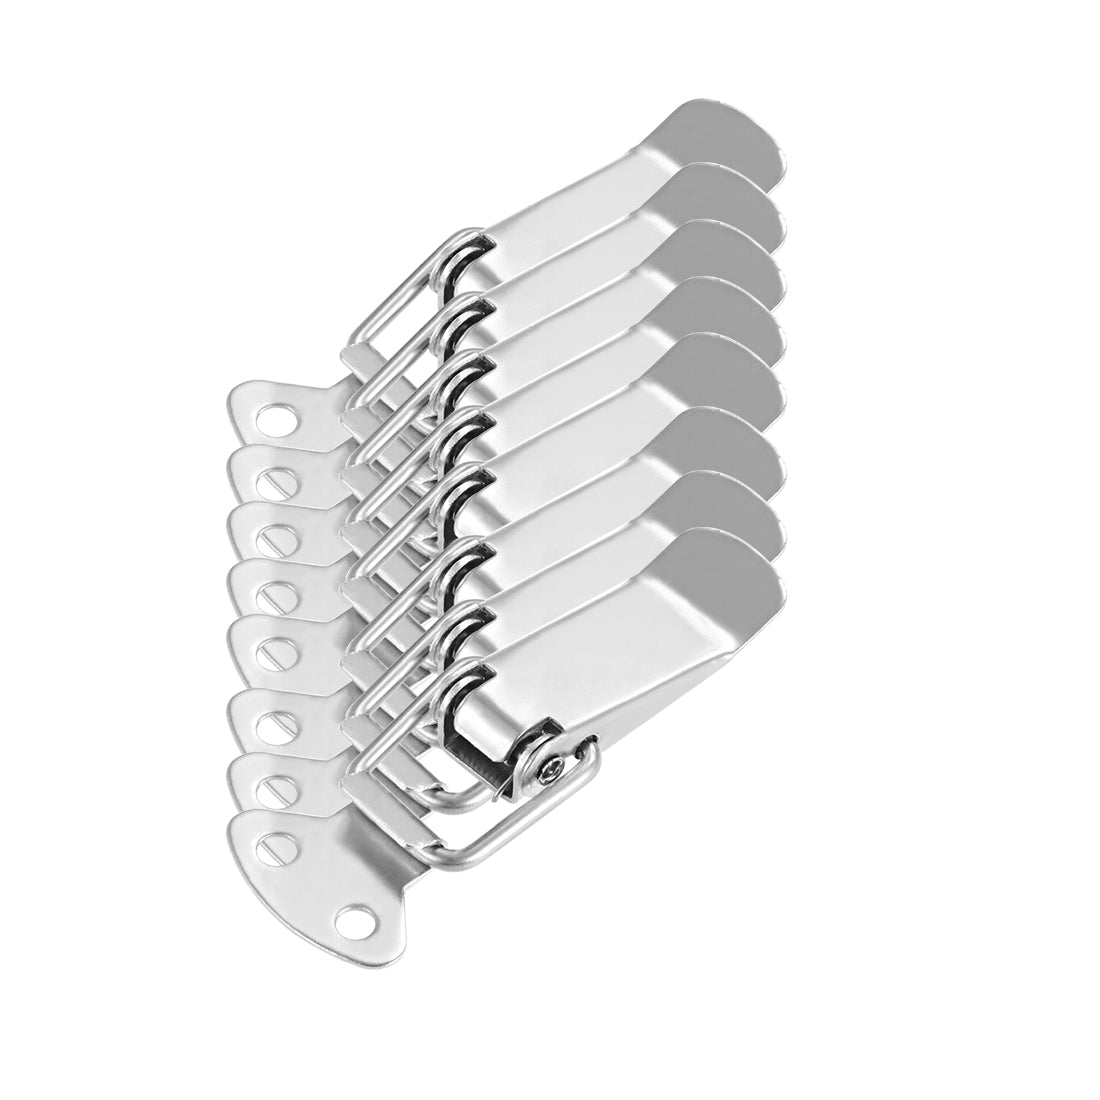 uxcell Uxcell 304 Stainless Steel Spring Loaded Toggle Case Box Chest Trunk Latch Catches Clamp Hasps 8 pcs, 72mm Overall Length